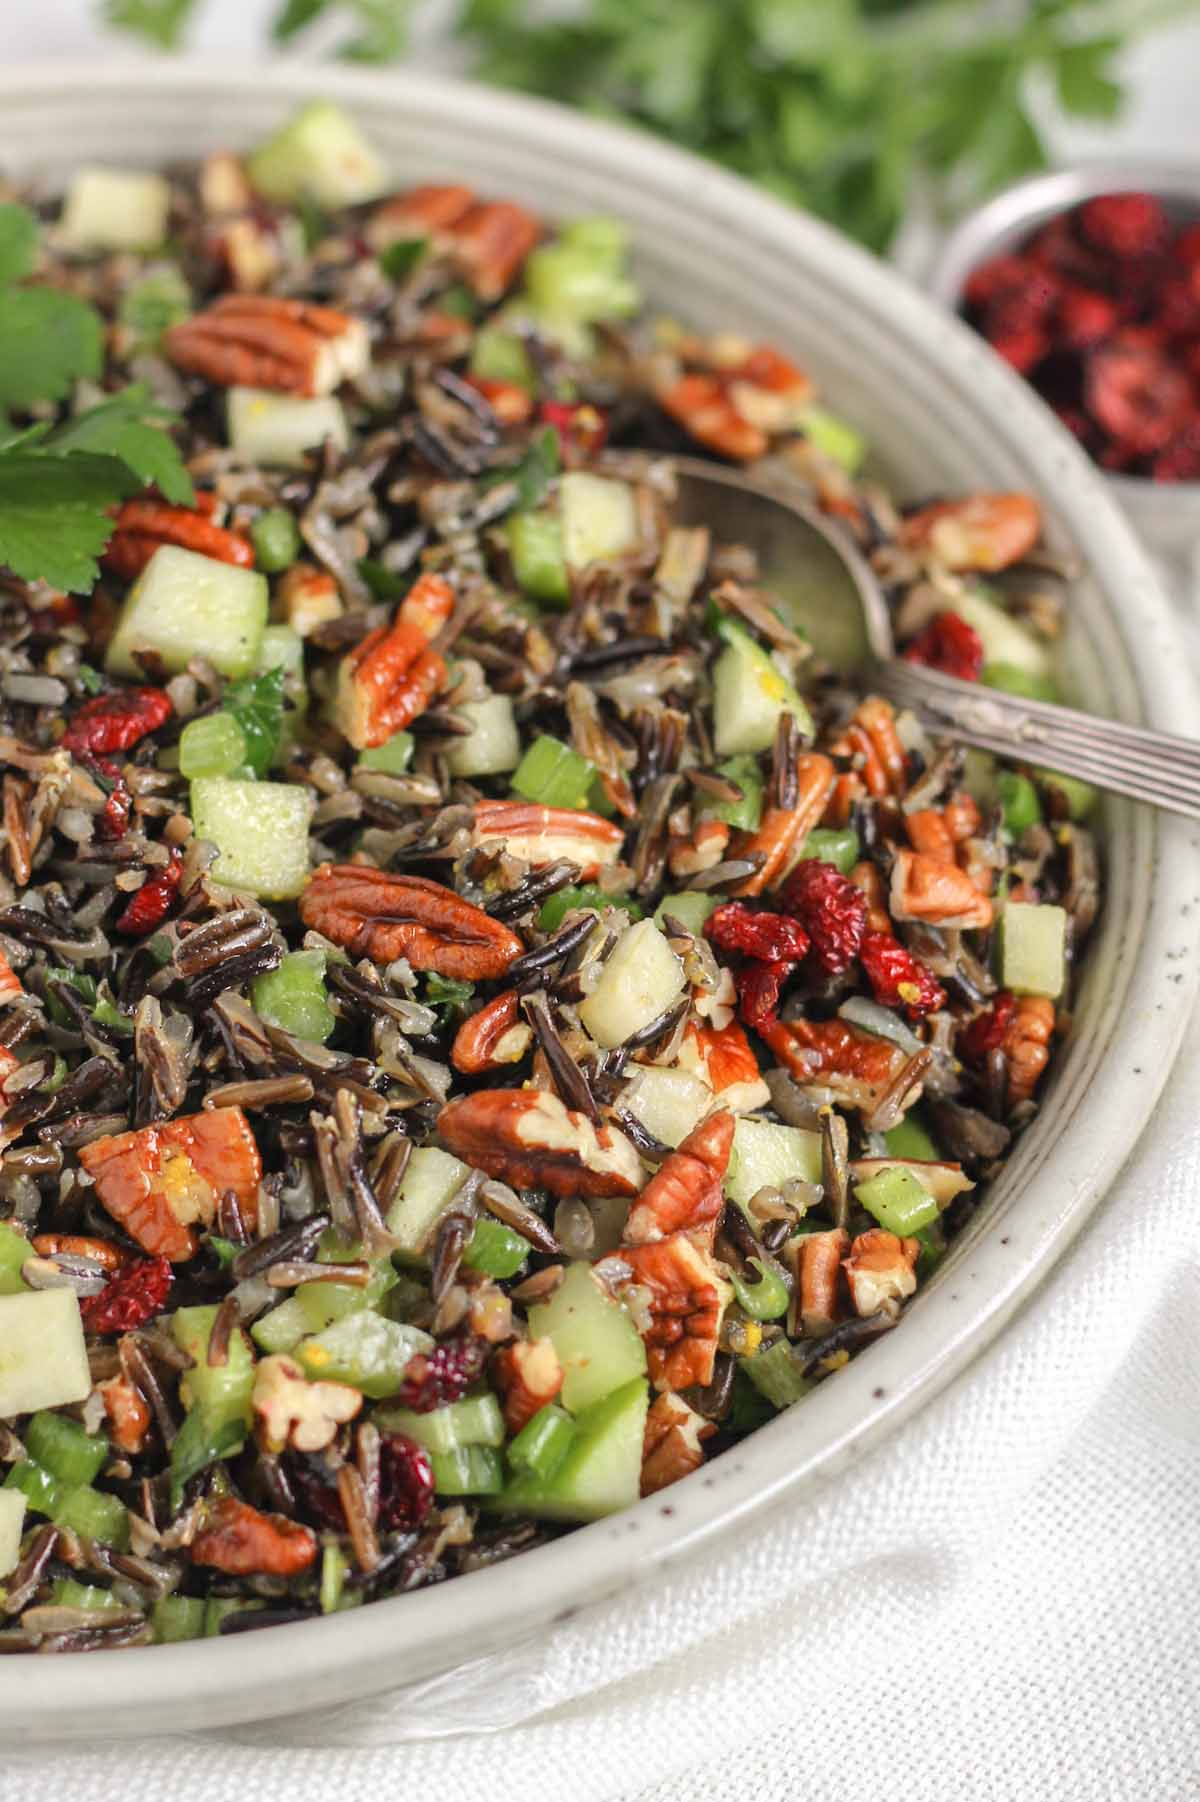 Cold wild rice salad with a vintage serving spoon in a ceramic serving bowl.